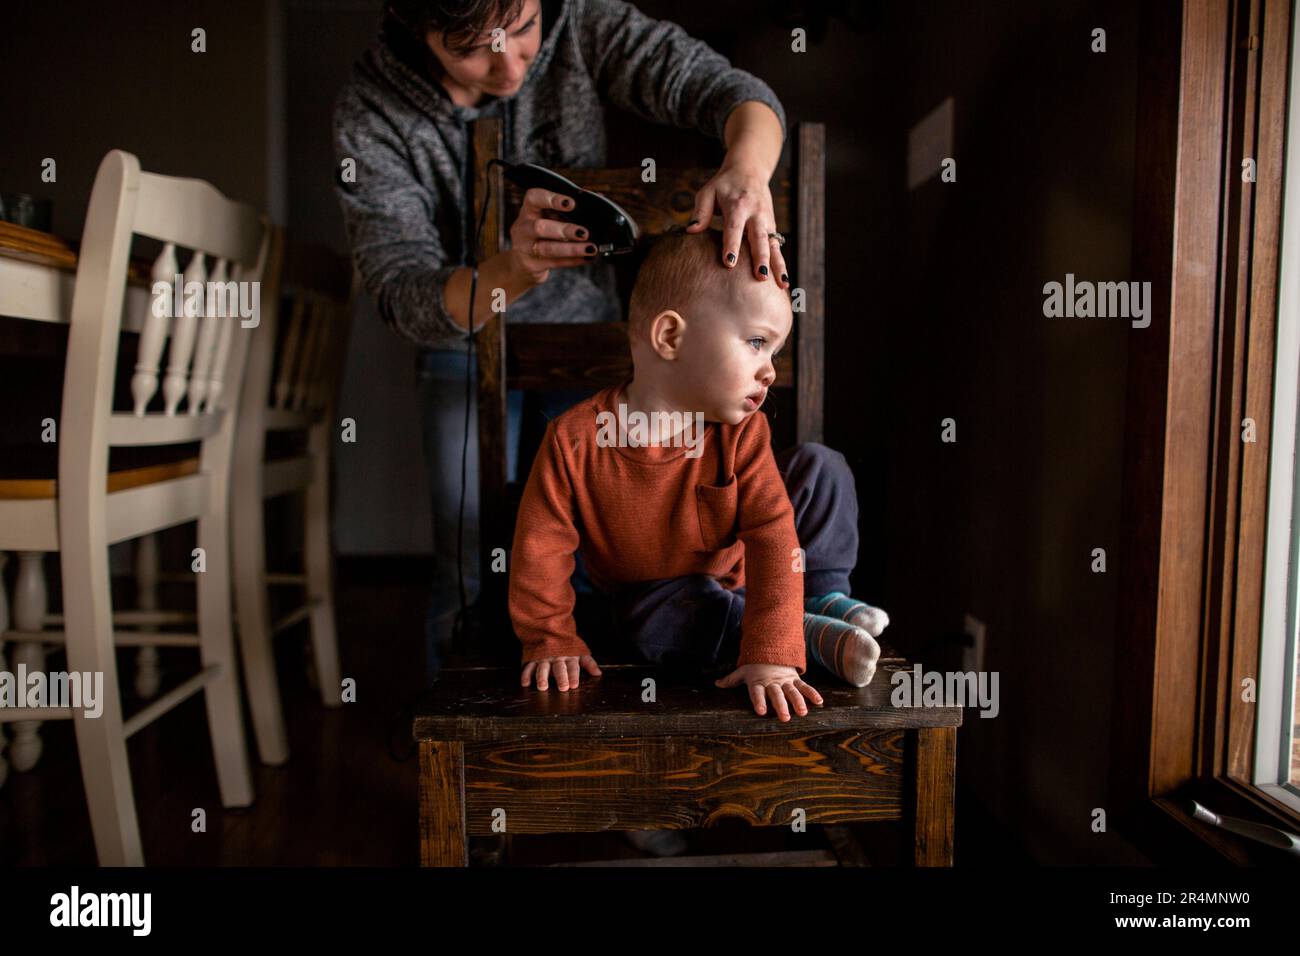 Mom cutting young boys hair at home sitting on a chair looking away Stock Photo